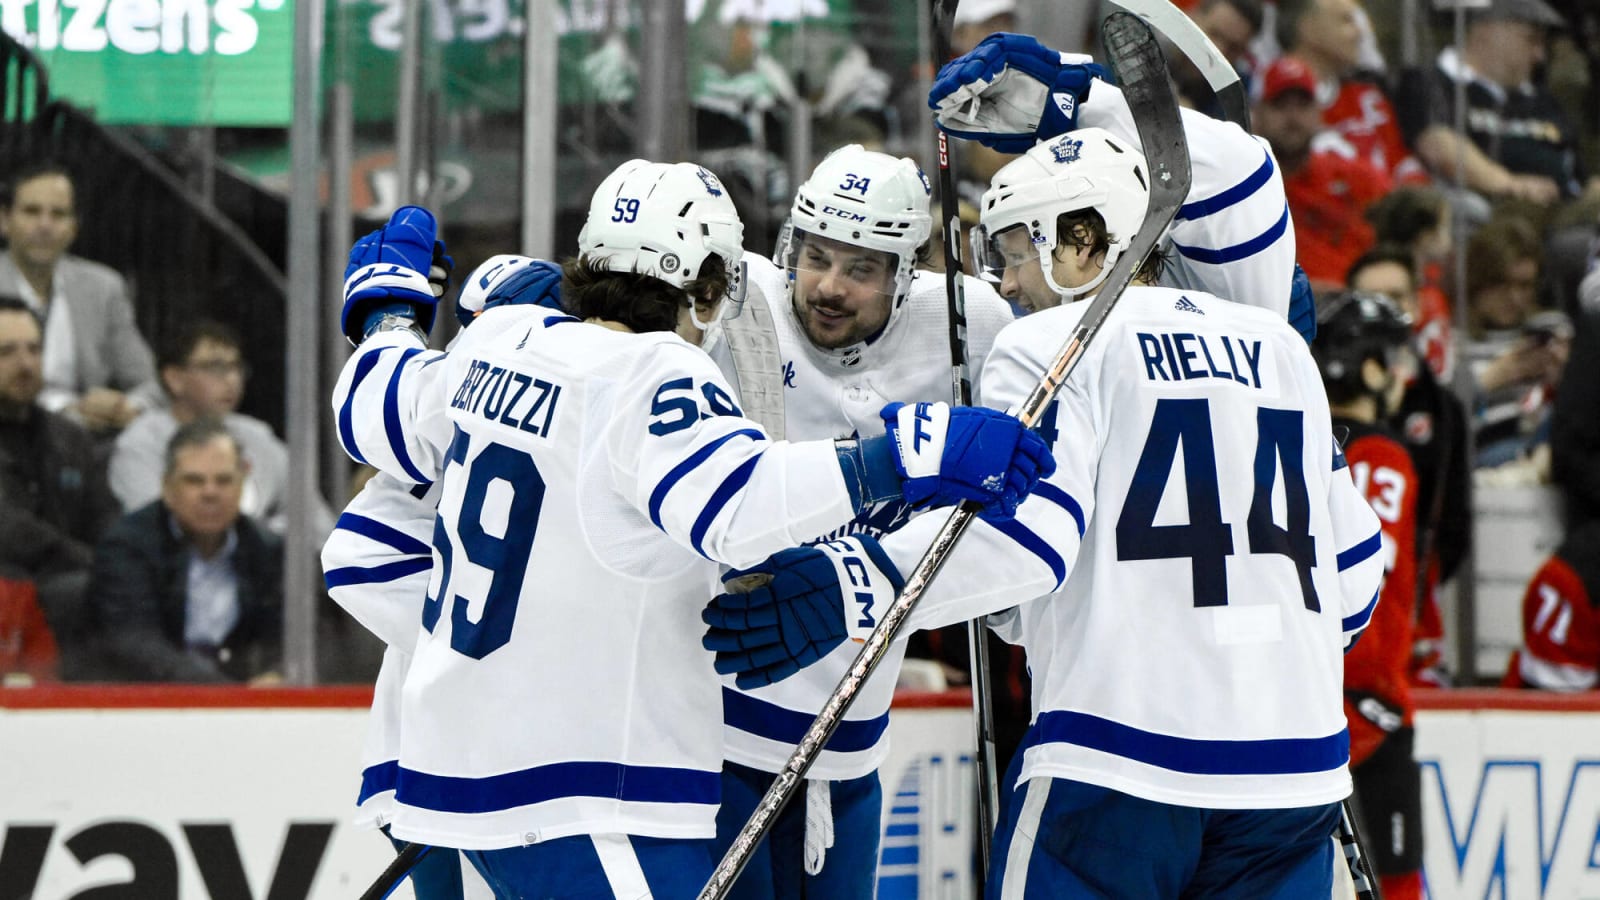 Load management continues as Maple Leafs close out home and home against Devils